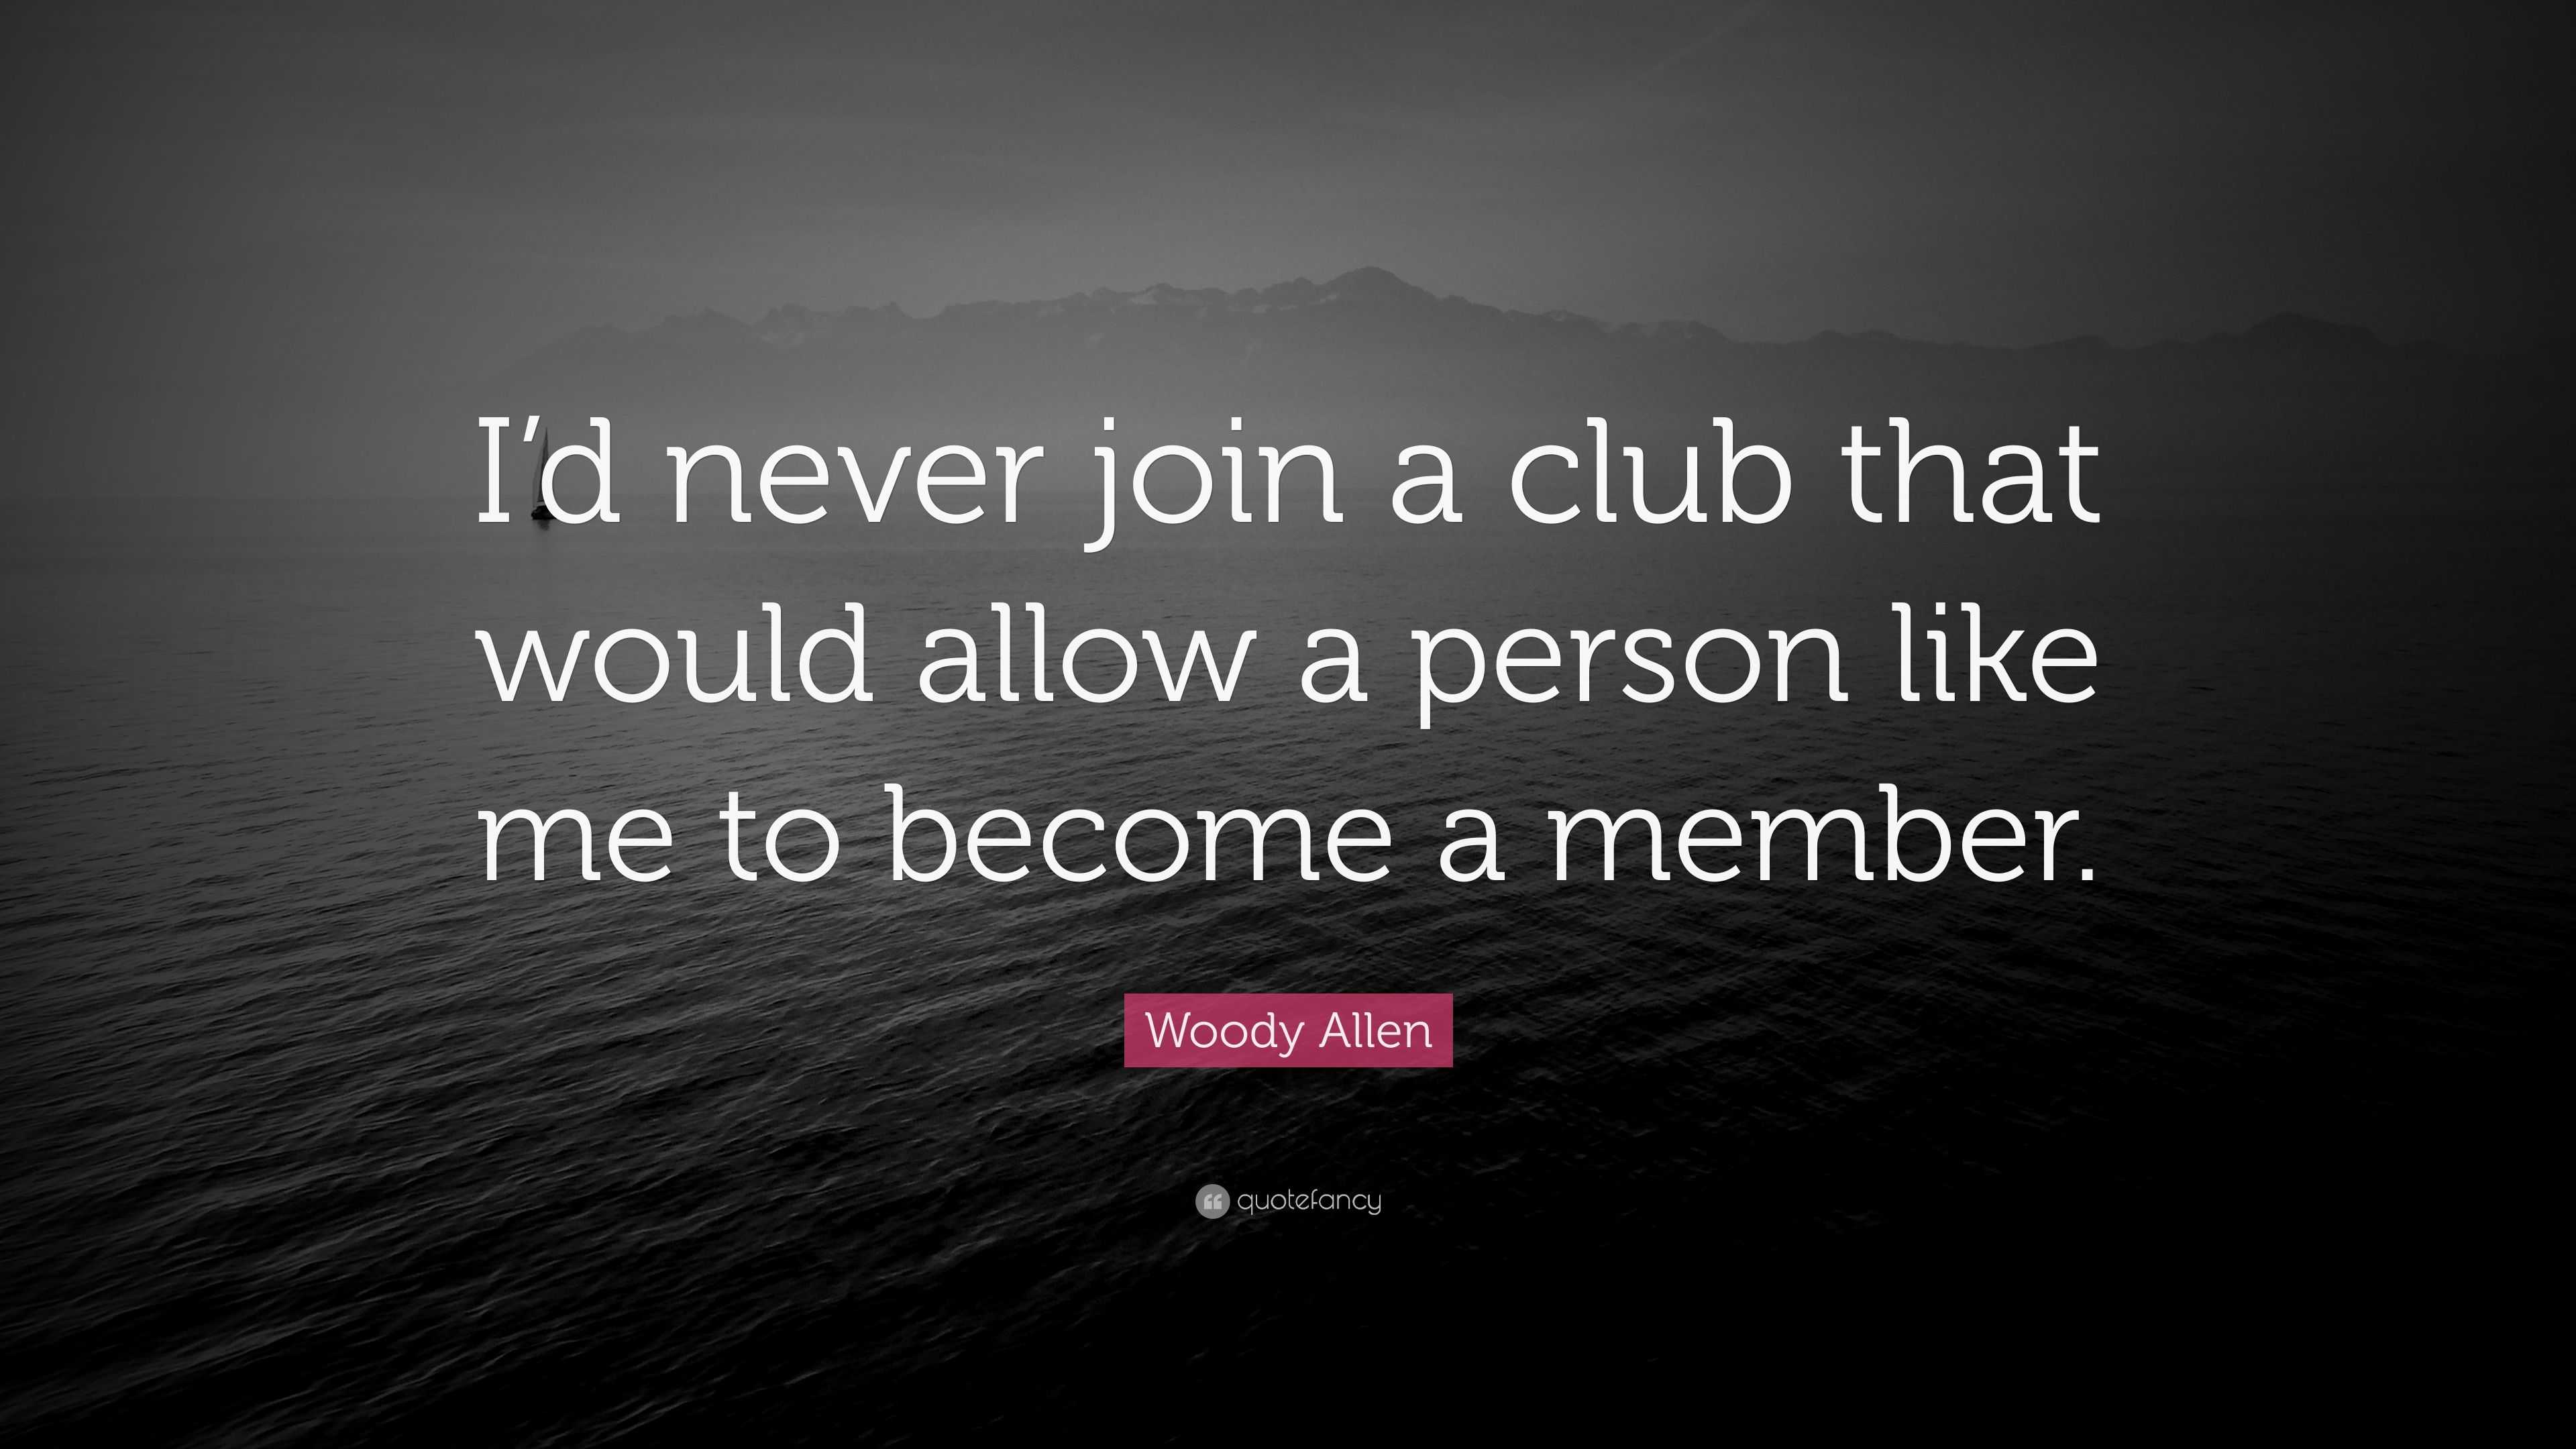 Woody Allen Quote: “I'd never join a club that would allow a person like me